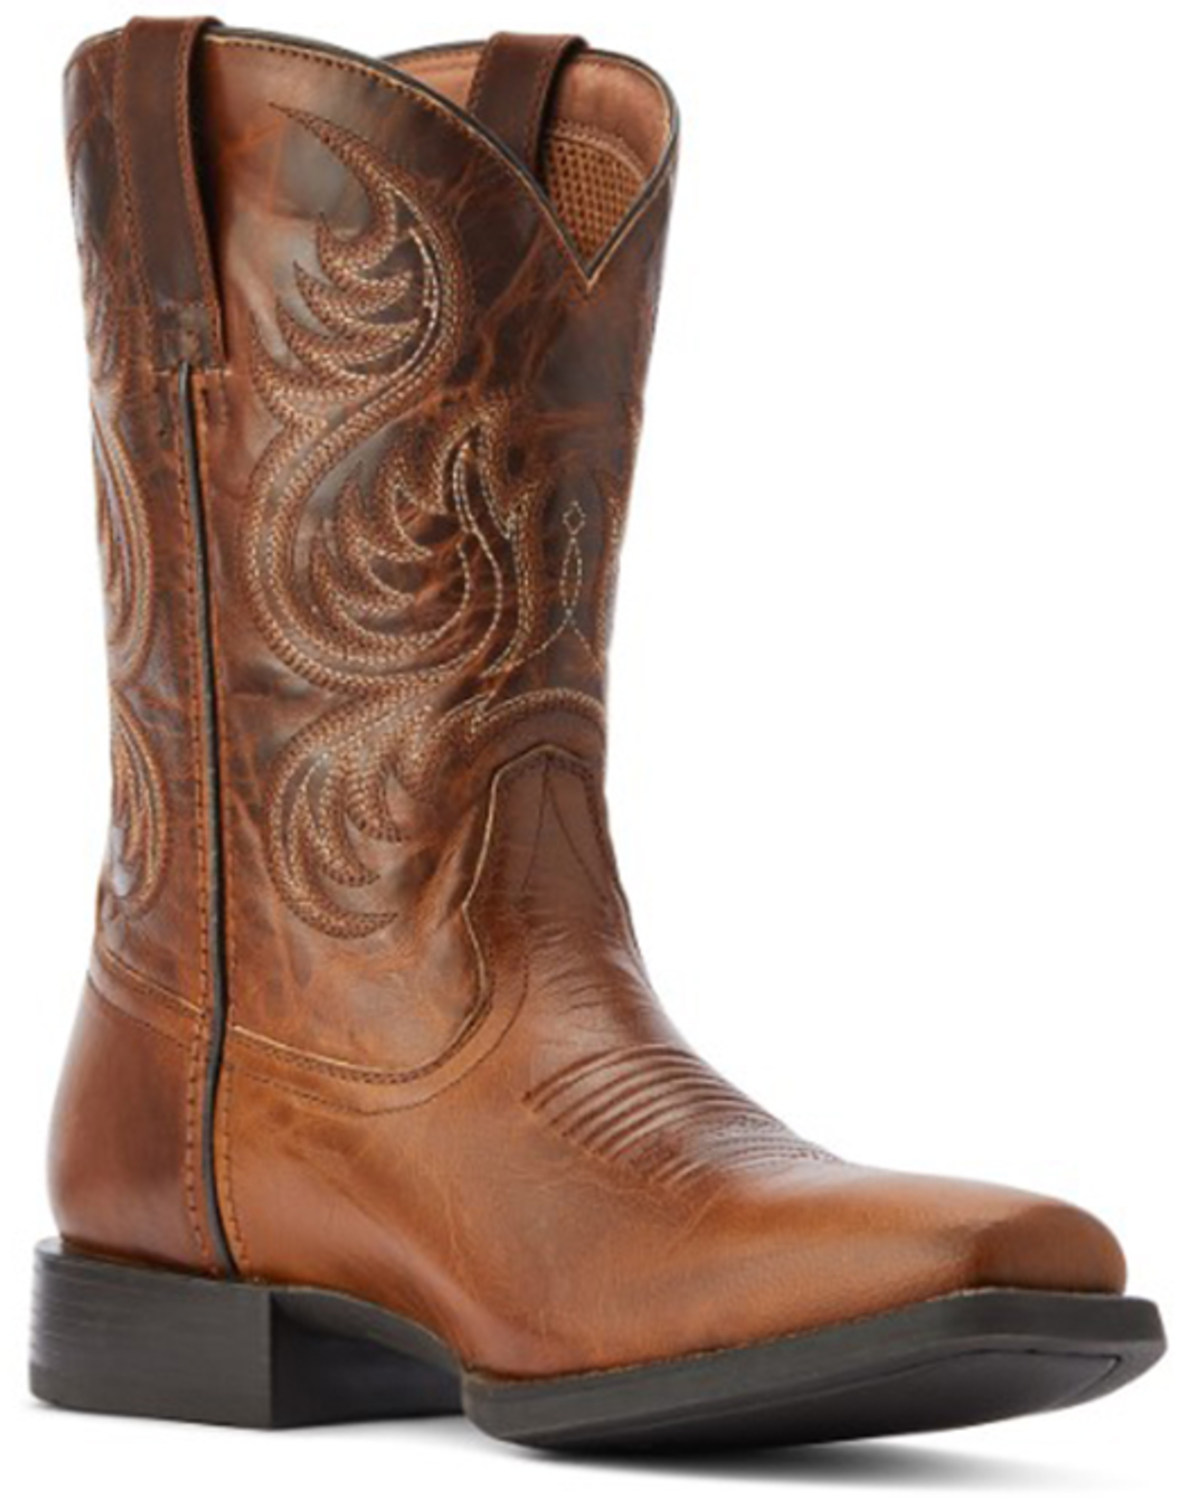 Ariat Men's Sport Boss Western Performance Boots - Square Toe